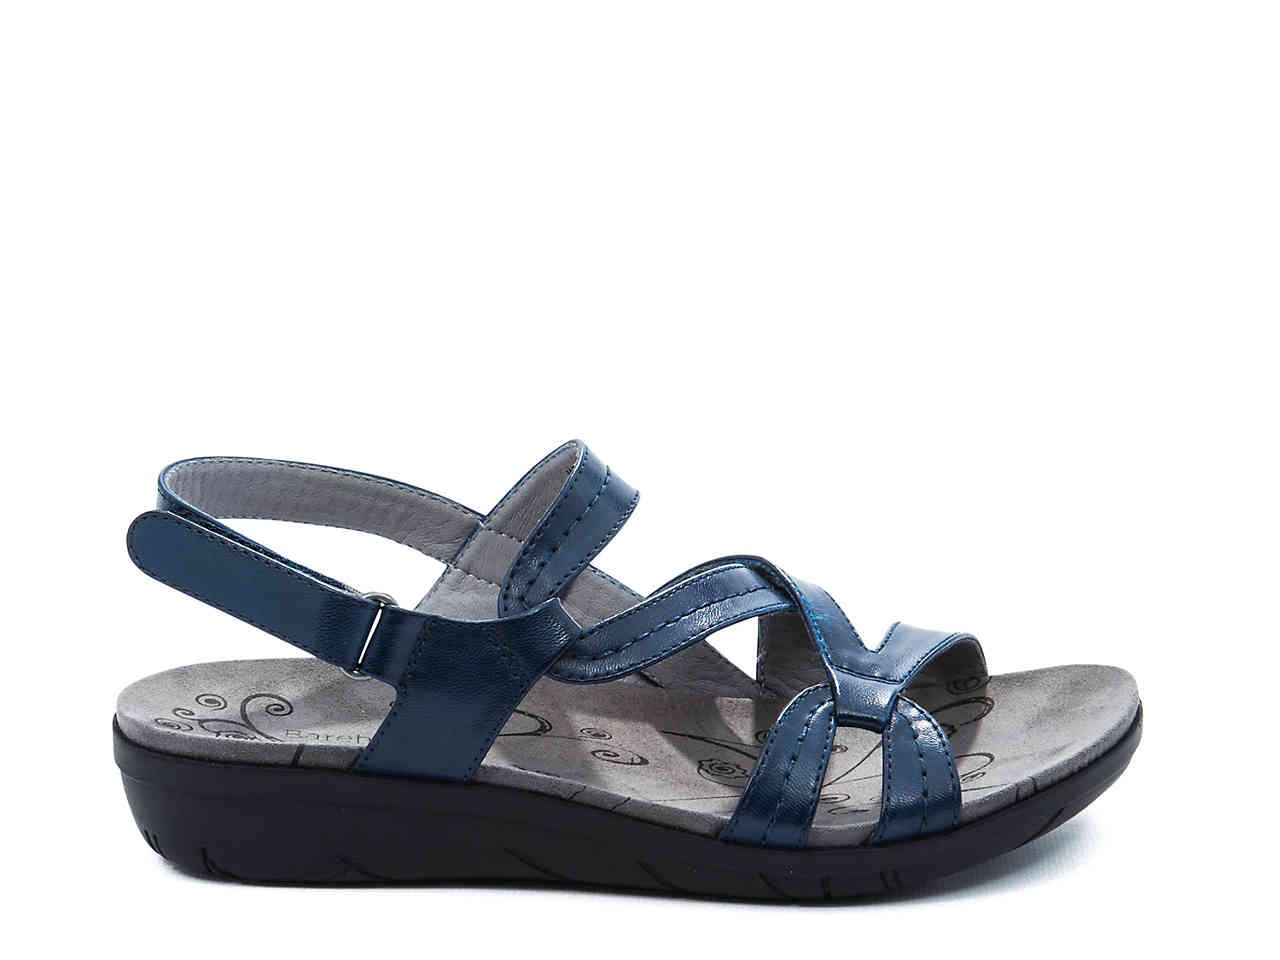 New Bare Traps Sandals Jaycee Comfort Shoes Size 11 Navy Blue Leather ...